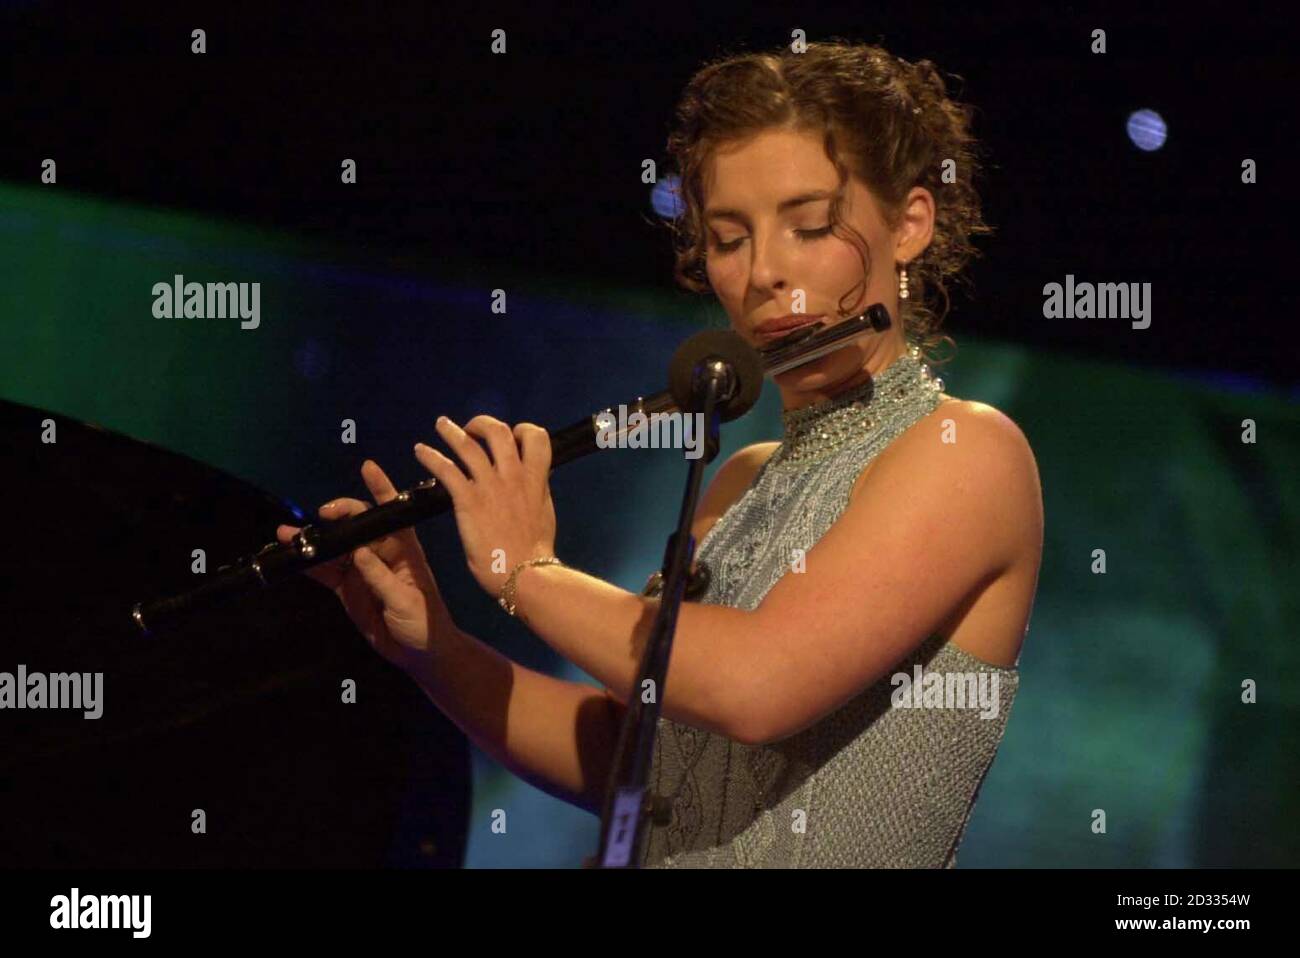 Blathnaid Nuallain, representing the Fodhla - the Irish speaking areas of Ireland - plays the flute in the televised final of the 2003 Rose of Tralee International Festival, a personality contest for young women of Irish heritage, in Tralee, Co Kerry. *  As well as becoming an ambassador for the festival and for Ireland, the winning Rose will receive a selection of gifts and prizes including 5,000 euros in cash.  Stock Photo